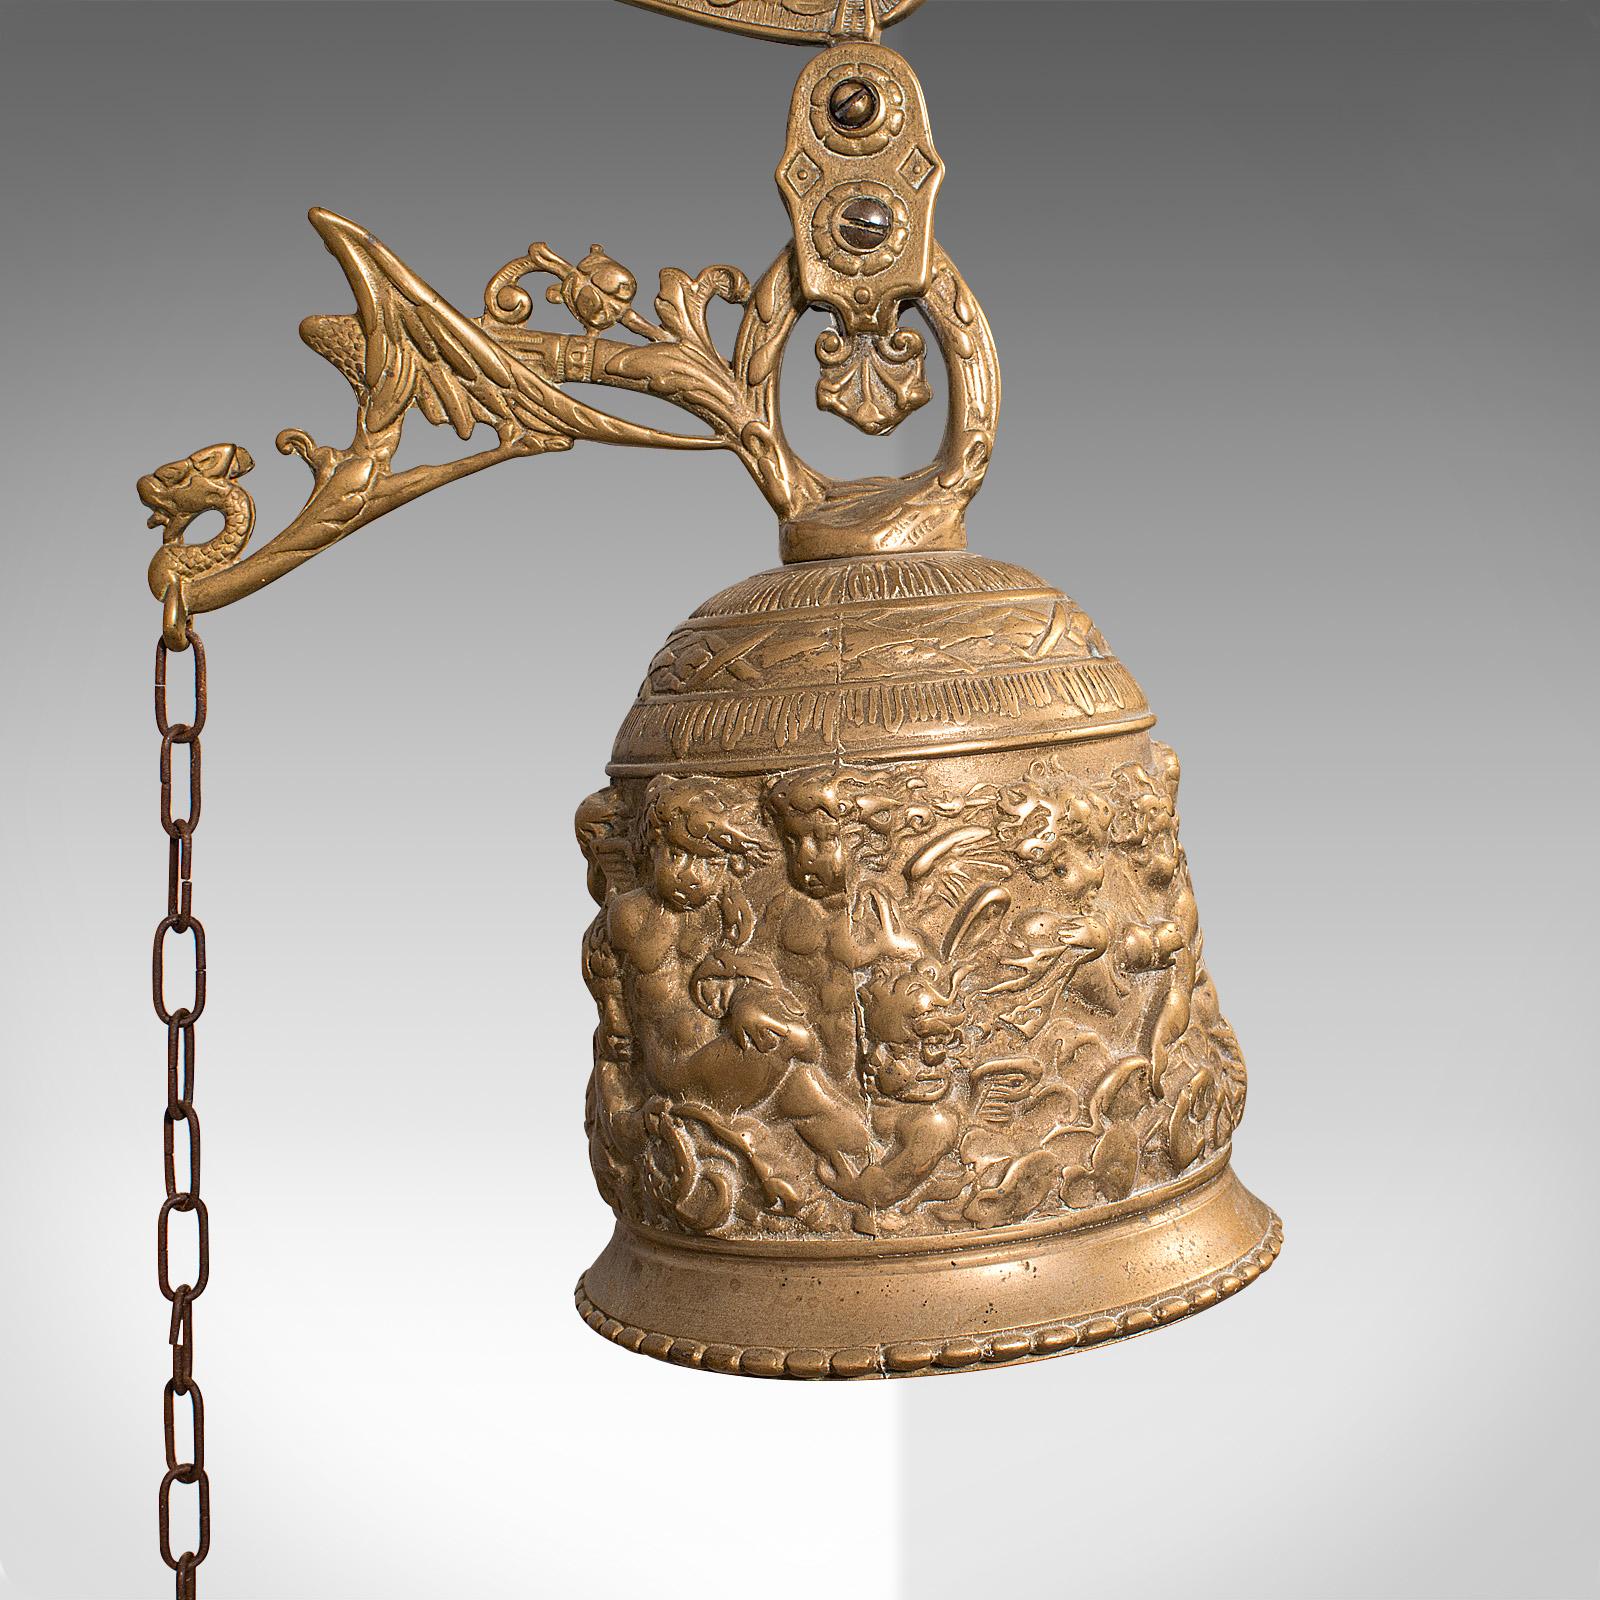 19th Century Antique School Bell, Continental, Brass, Wall Mounted Chime, Ornate, Victorian For Sale